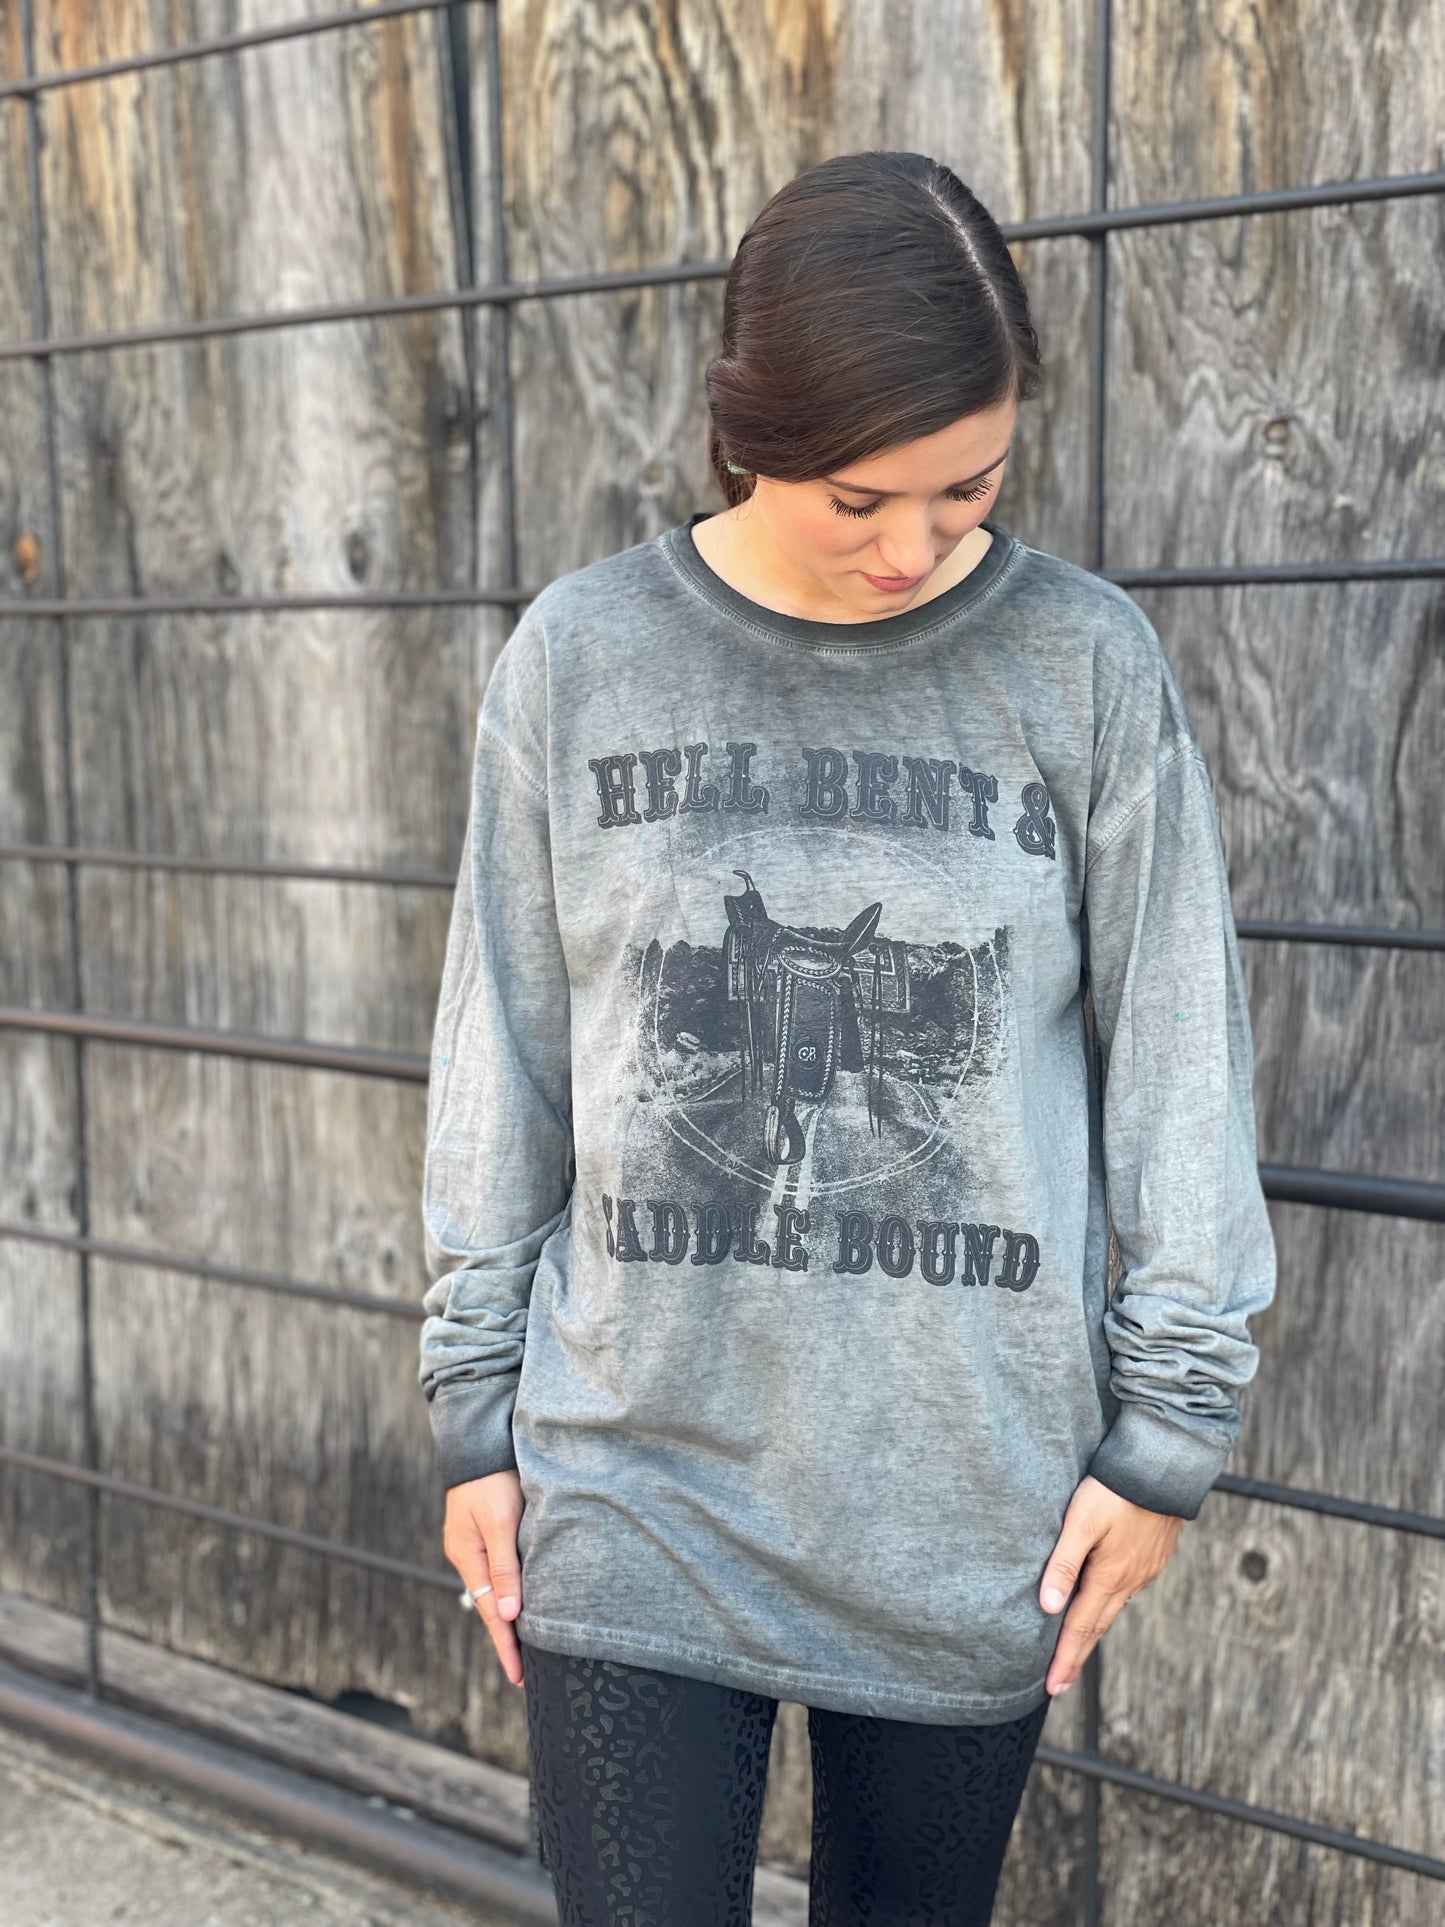 Hell Bent and Saddle Bound Long Sleeve Tee